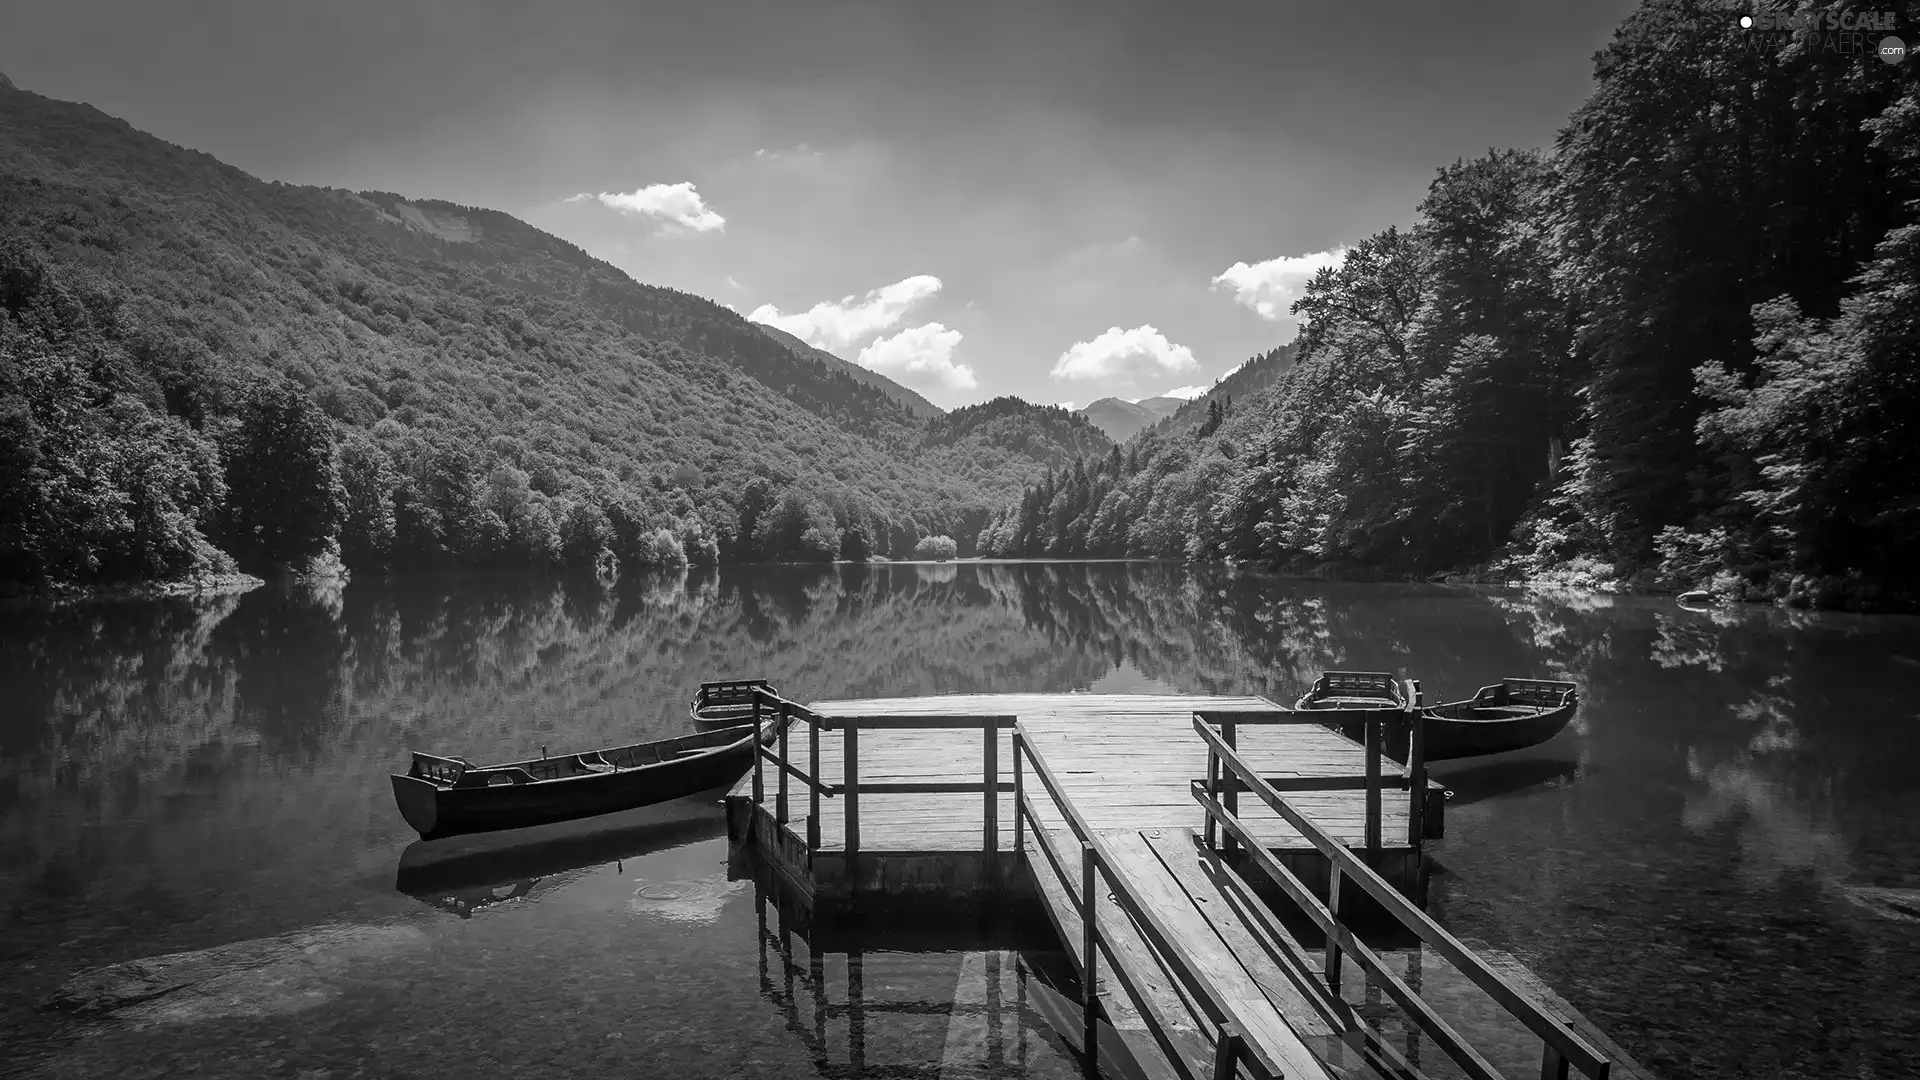 Mountains, Platform, trees, boats, lake, forest, viewes